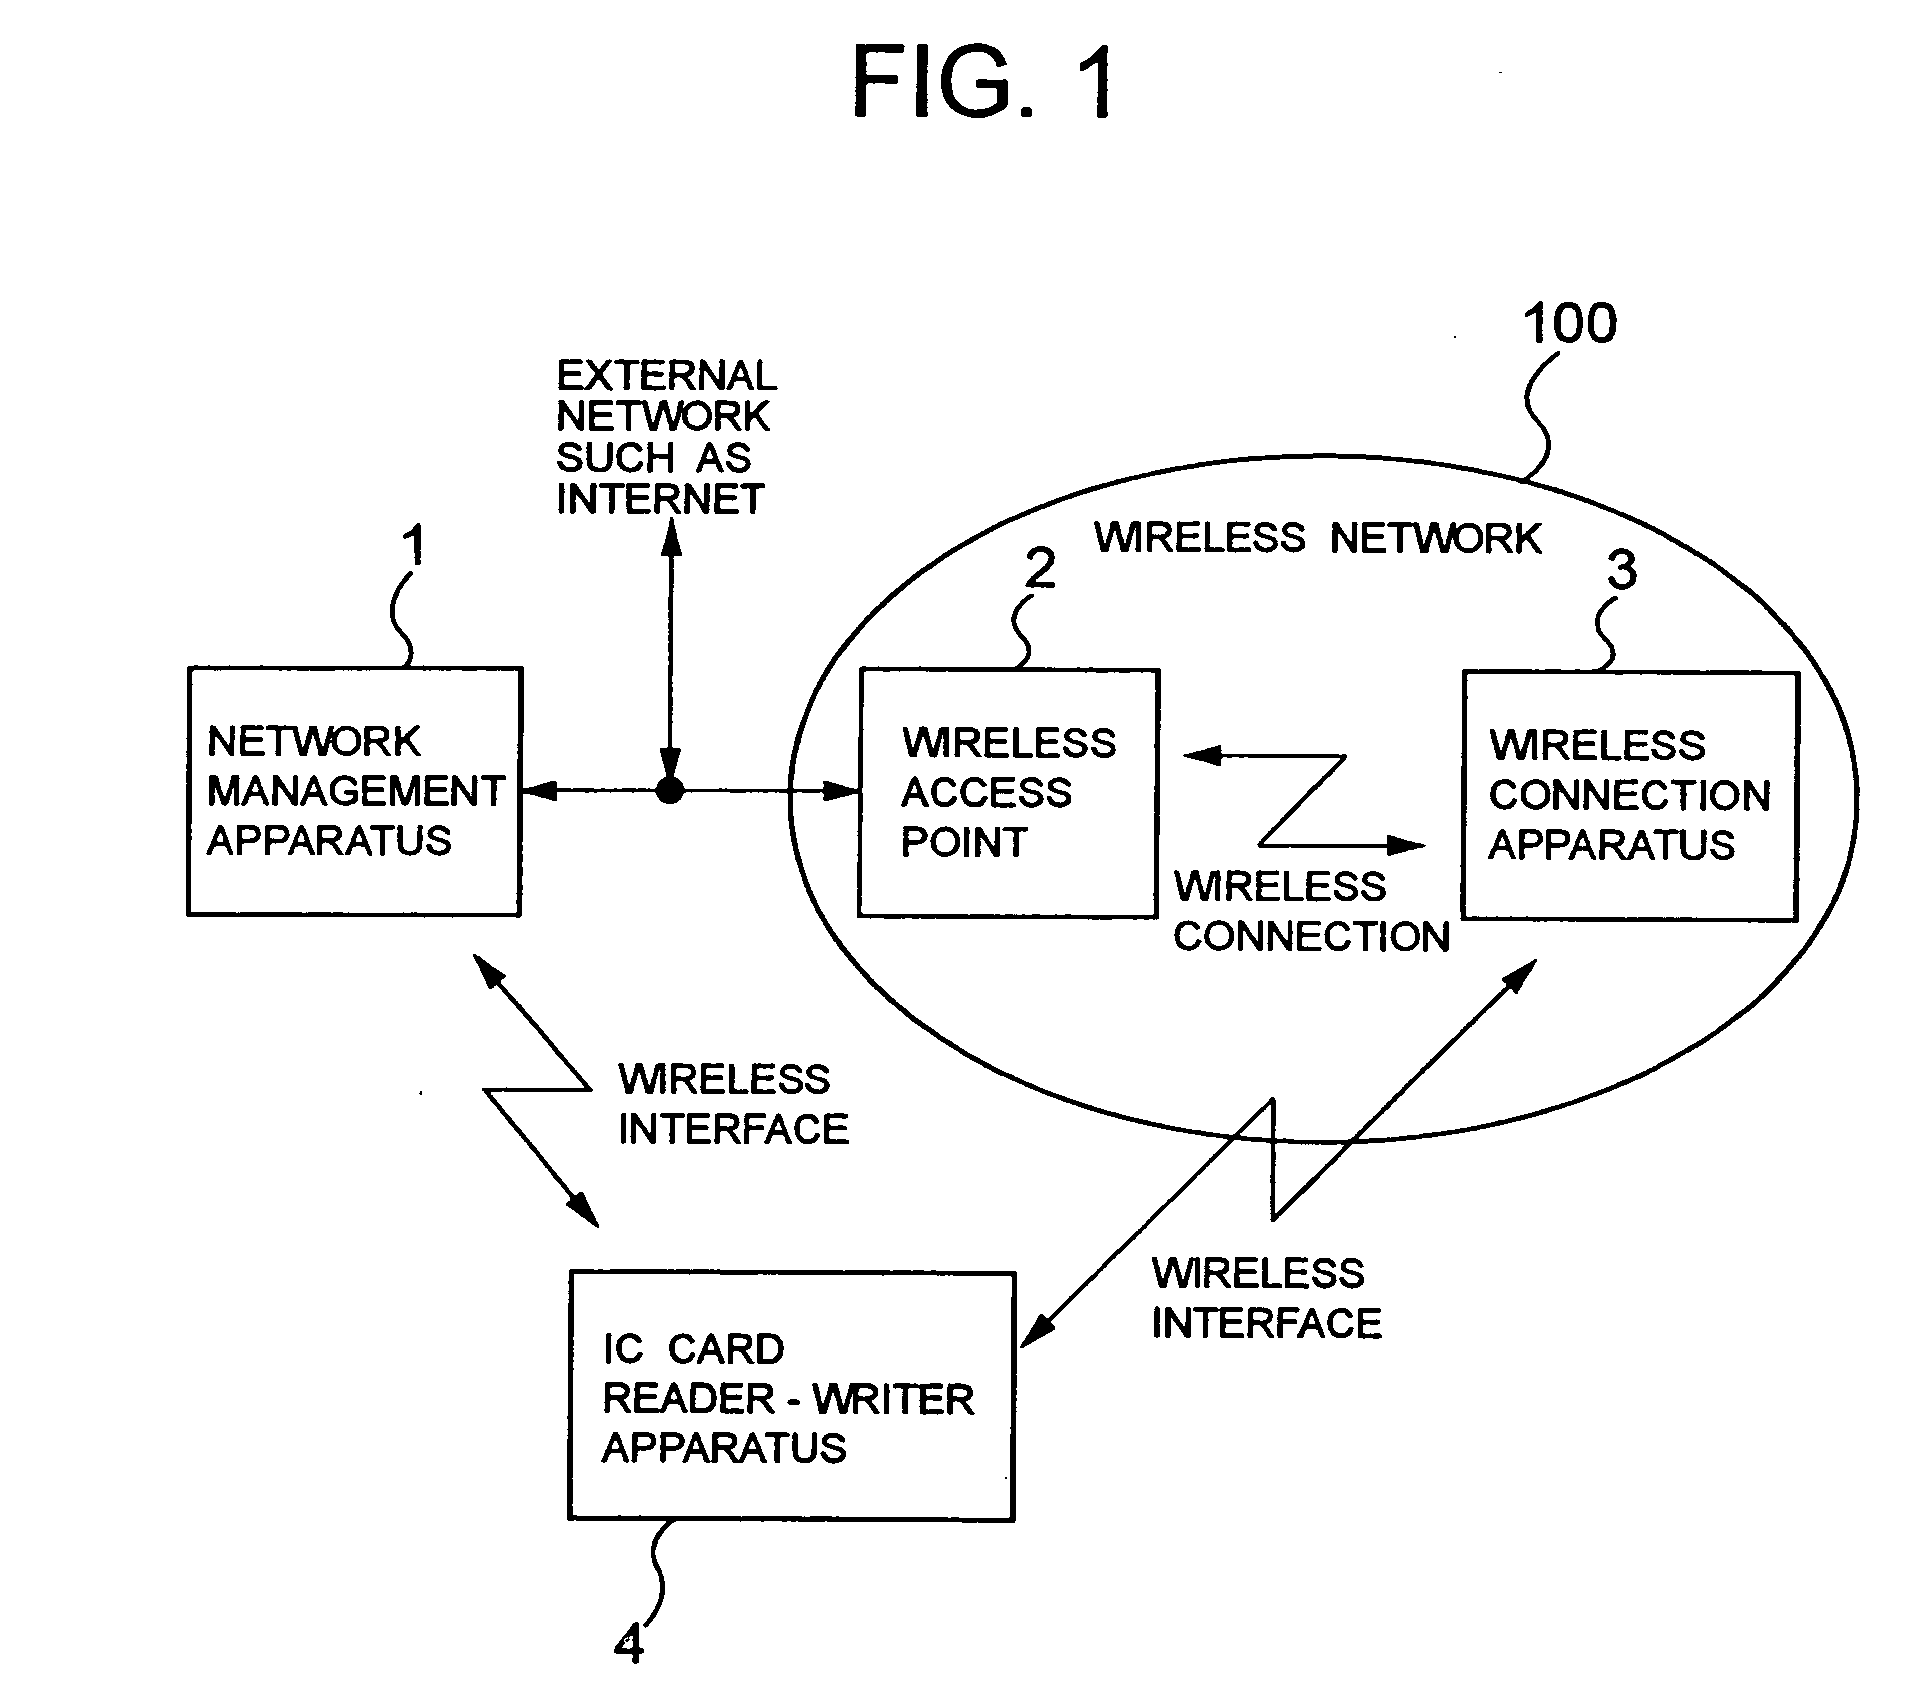 Wireless network registration system and wireless network registration method thereof